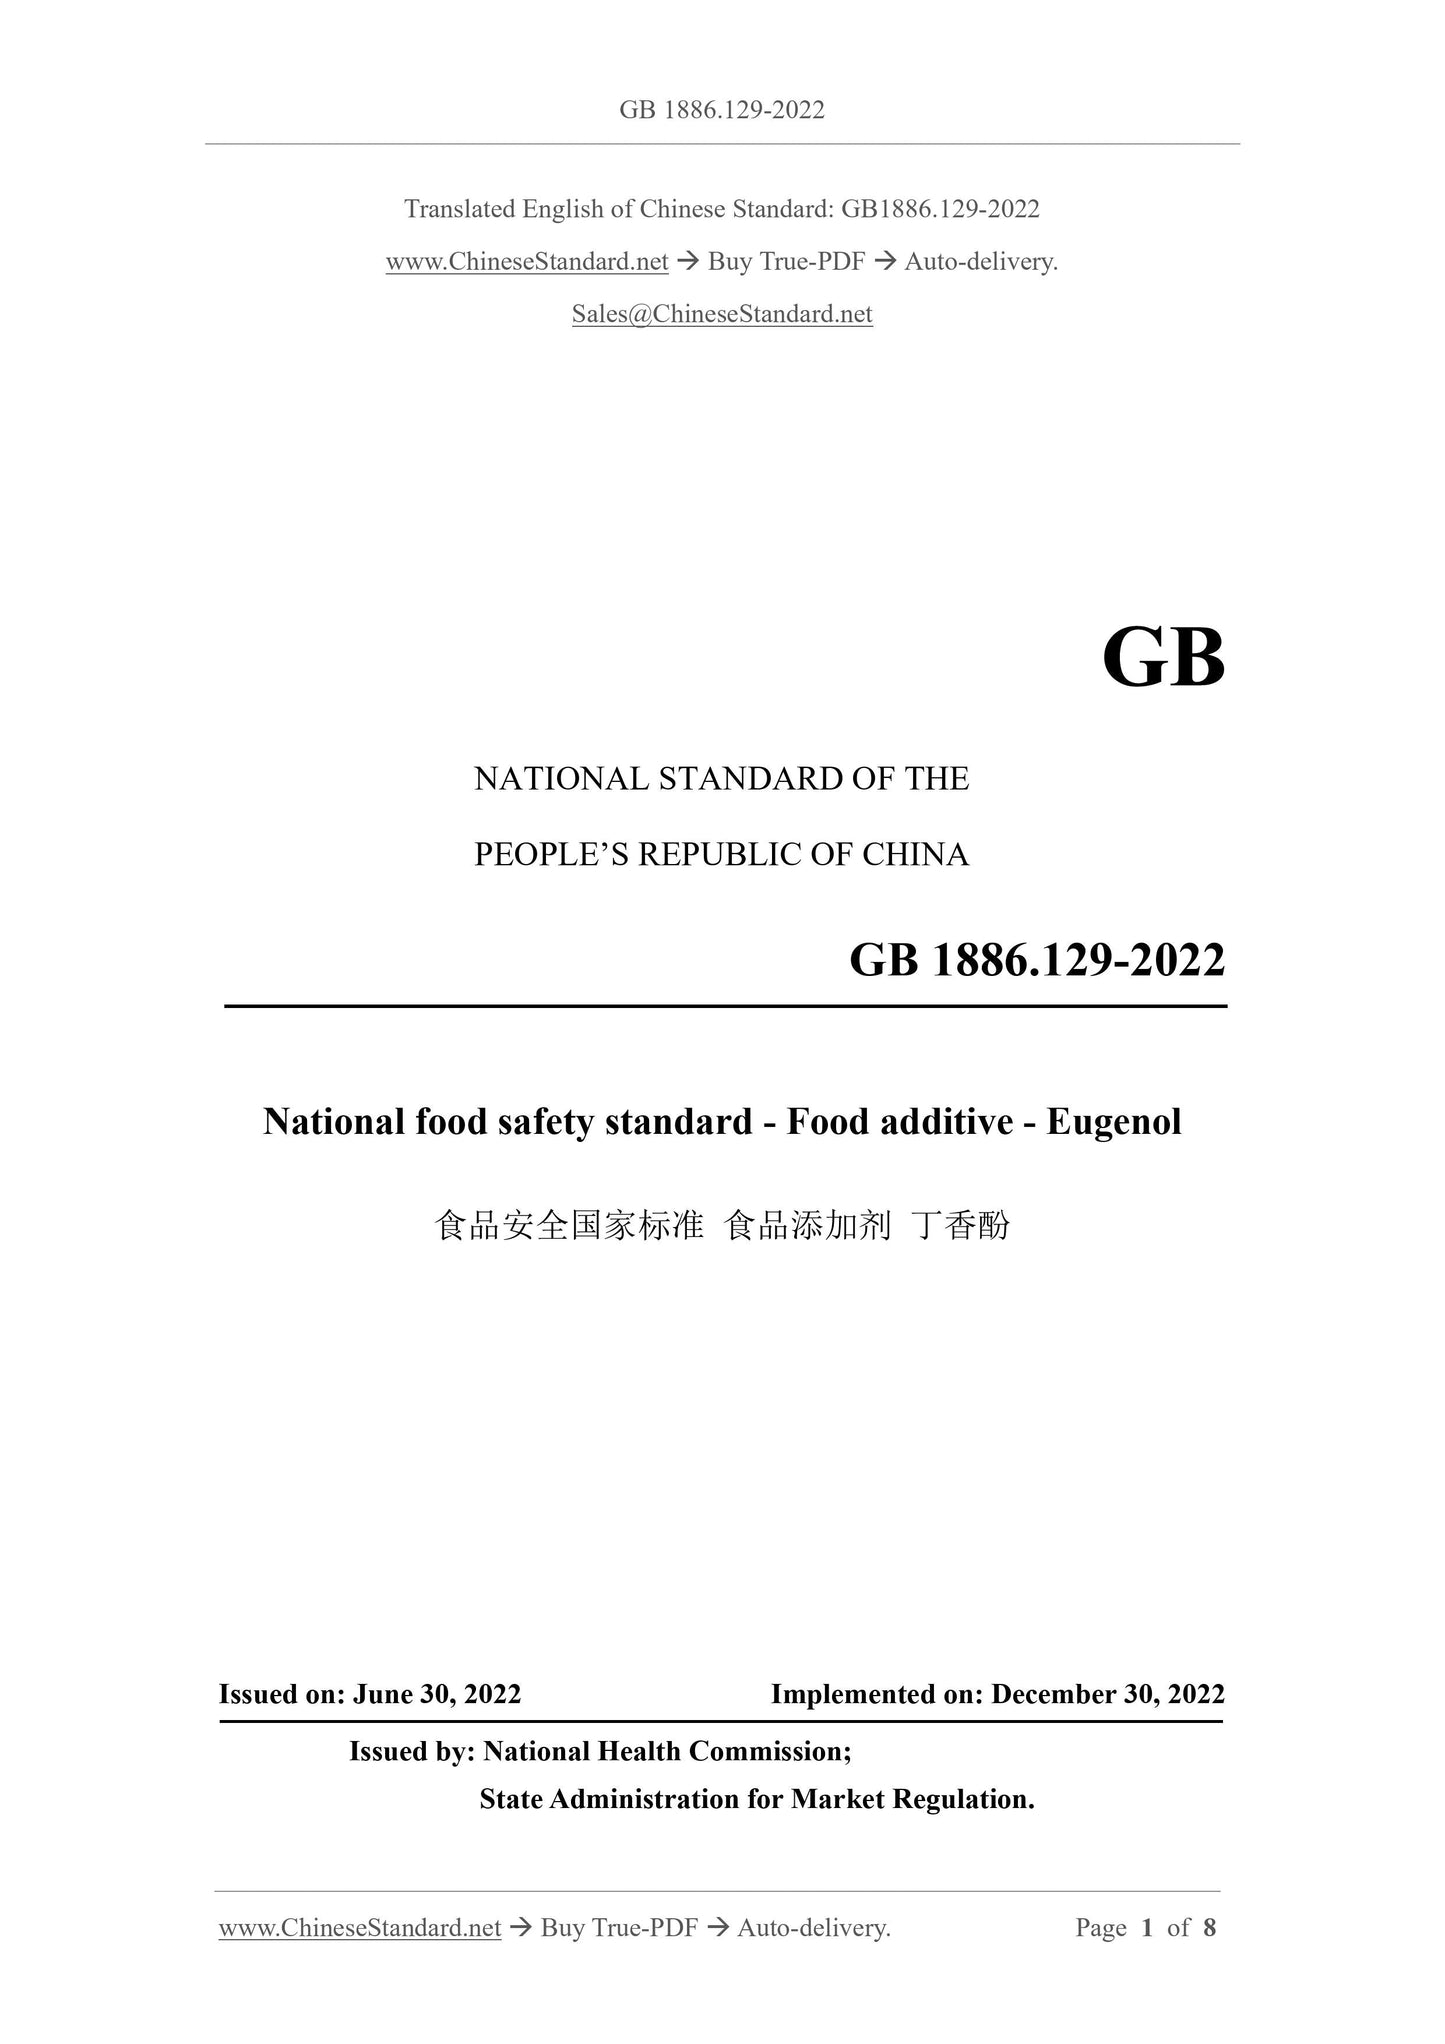 GB 1886.129-2022 Page 1